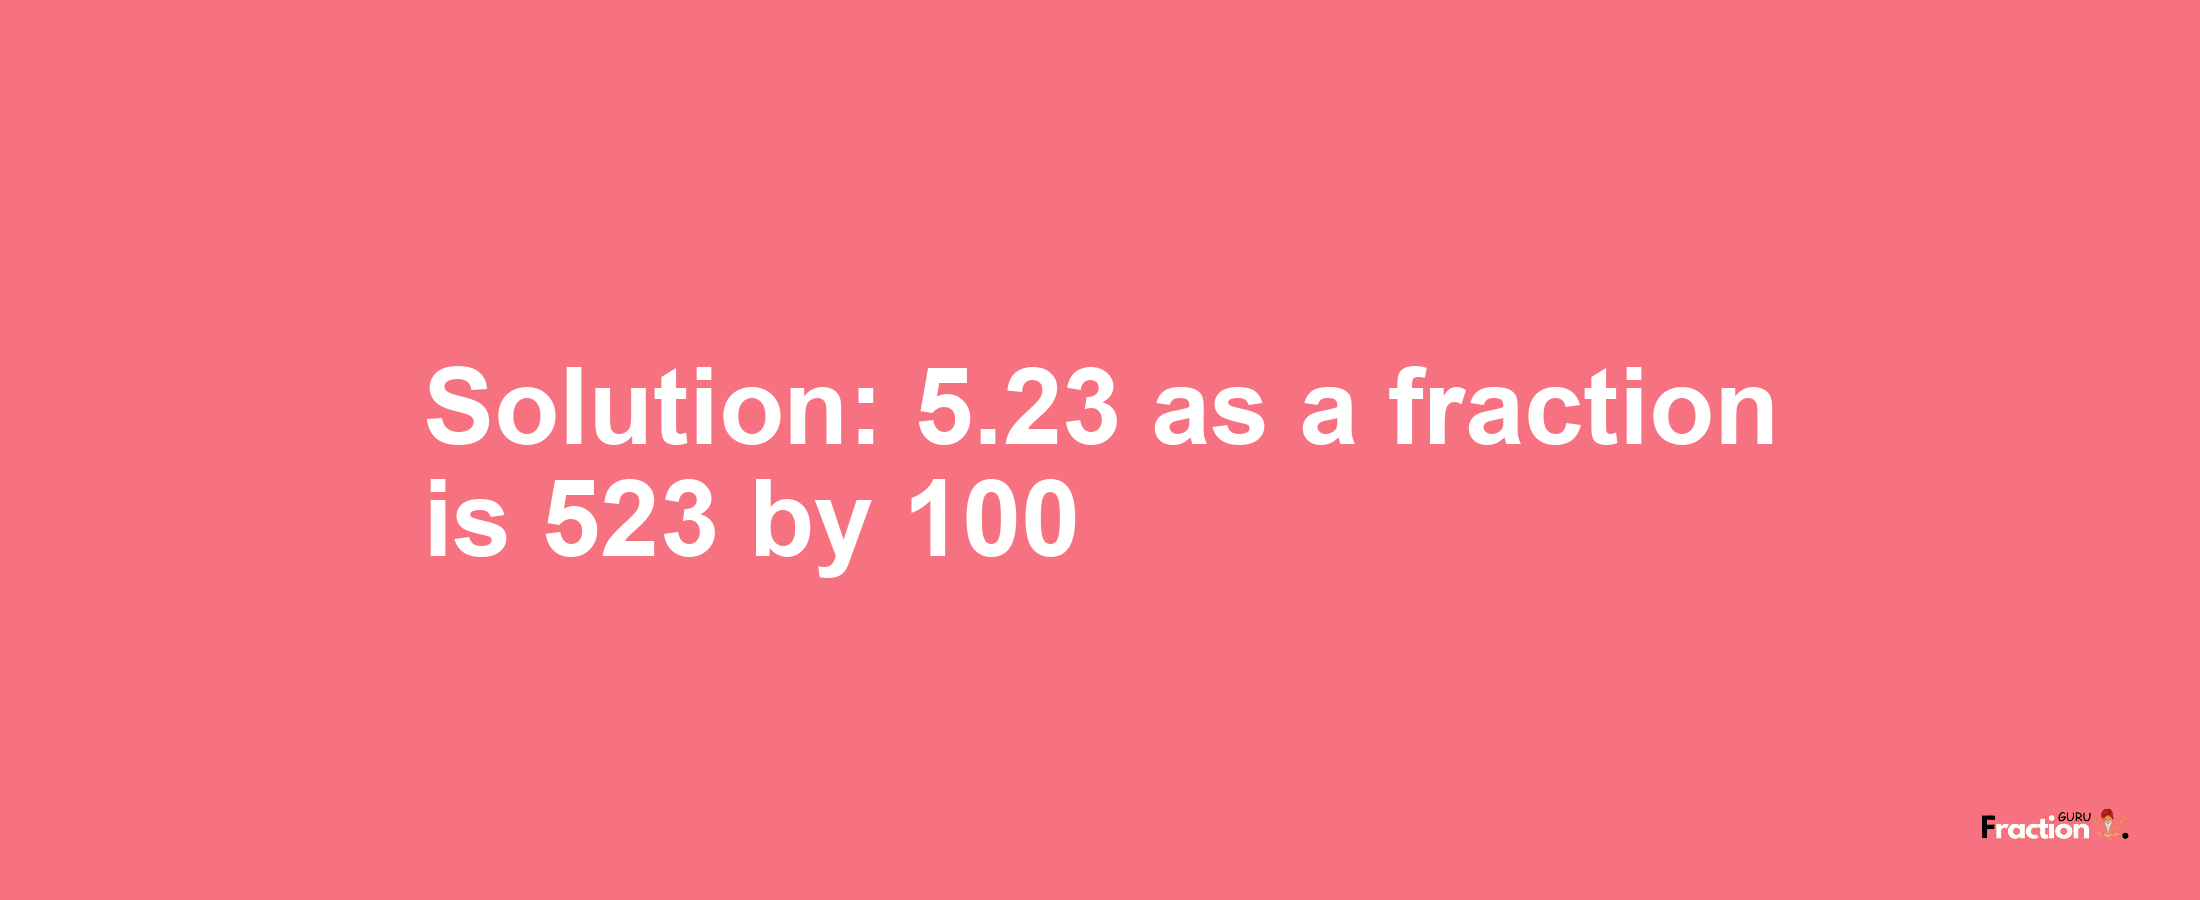 Solution:5.23 as a fraction is 523/100